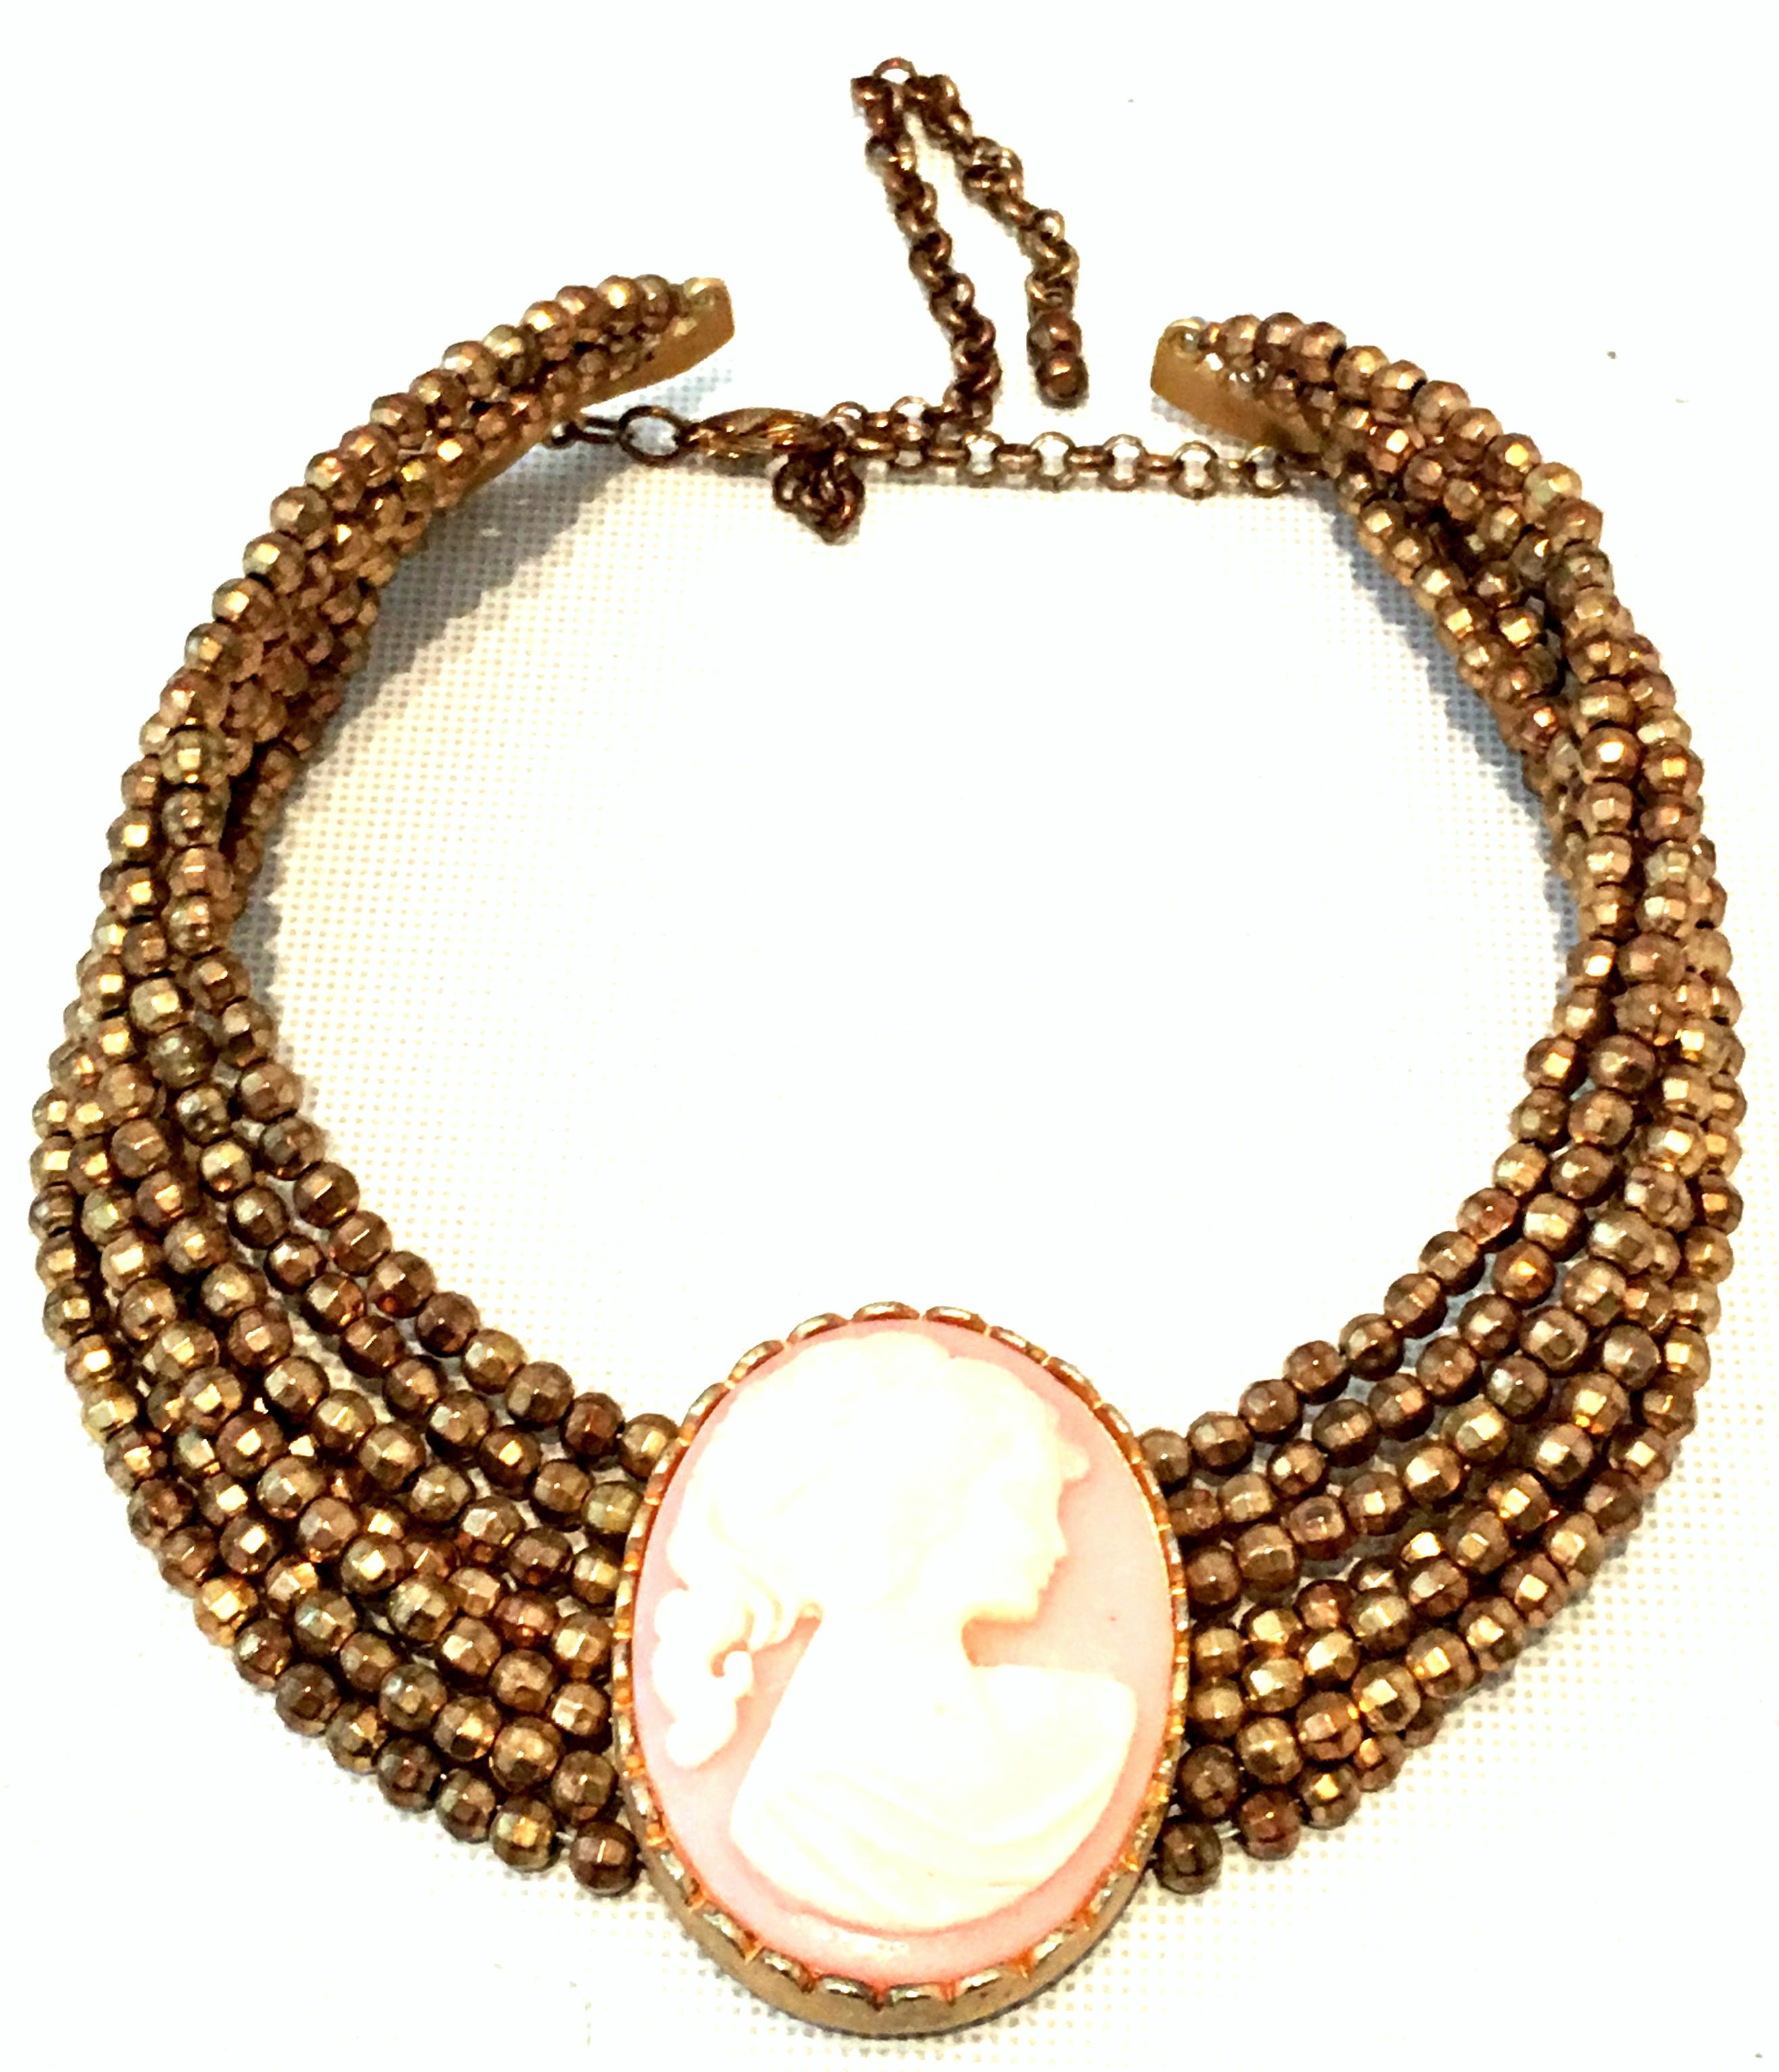 20th Century Gold Steel Cut Bead & Carved Lucite Cameo Multi Strand Choker Style Necklace. This finely crafted choker style necklace features seven rows of gold steel cut beads with a gold plate set Lucite carved pink and off white cameo central